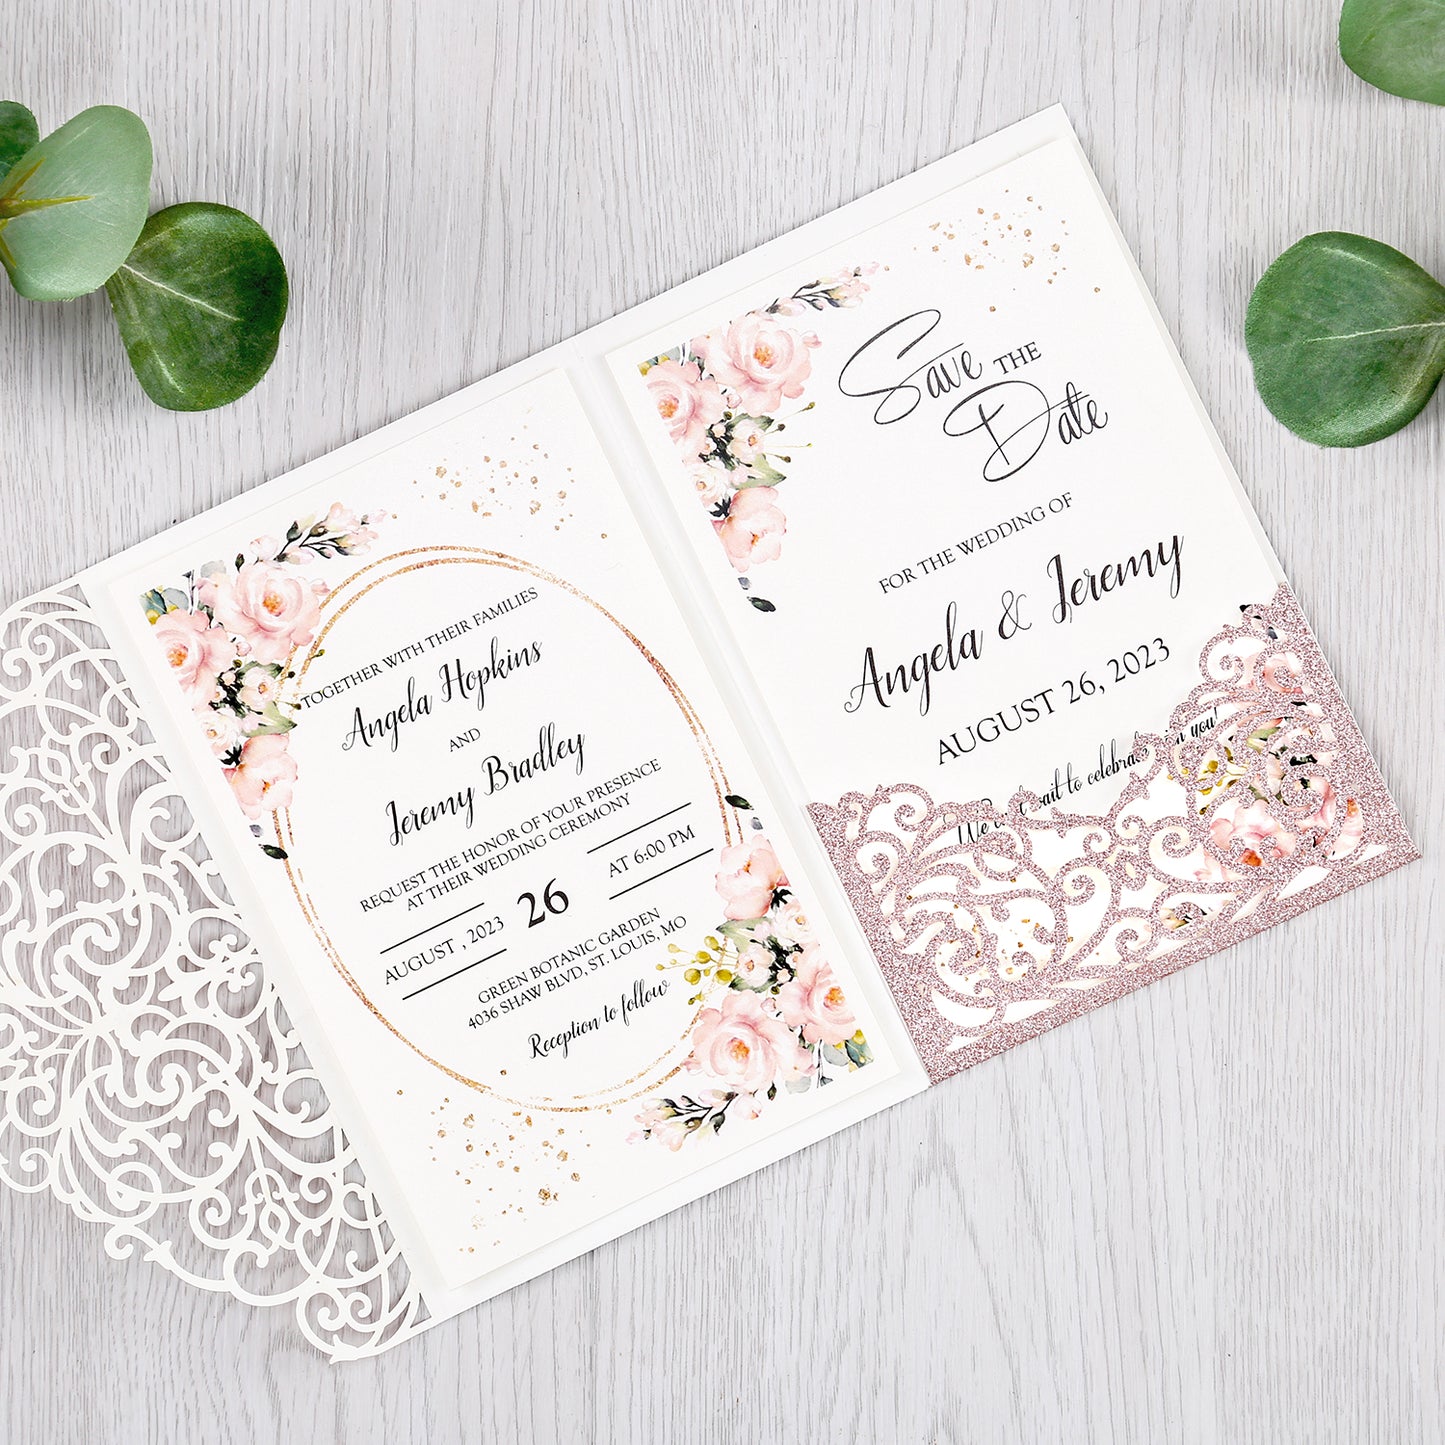 4.7 x7 inch Rose Gold Glitter Laser Cut Hollow Rose Wedding Invitations Cards with Glitter Pockets and Envelopes for Wedding Party - DorisHome